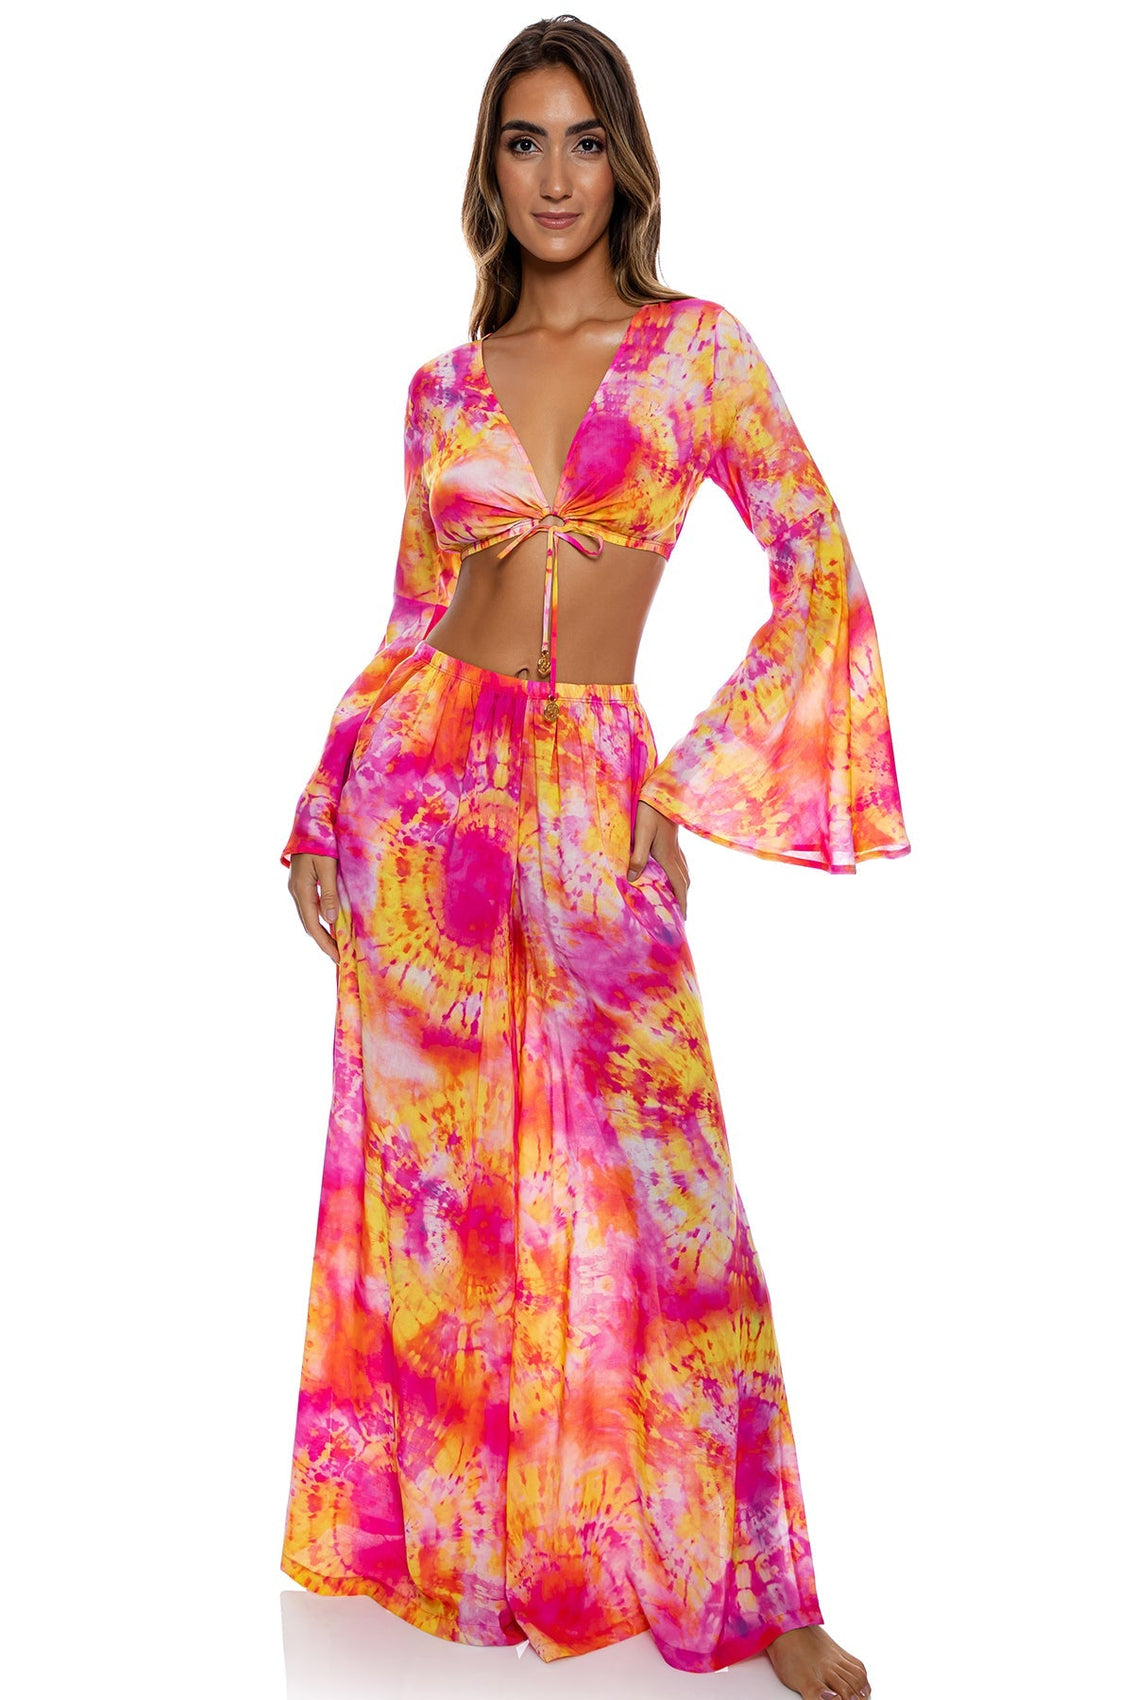 RETRO DREAM - Bell Sleeve Crop Top & Open Sides Wide Leg Pant • Multi Pink